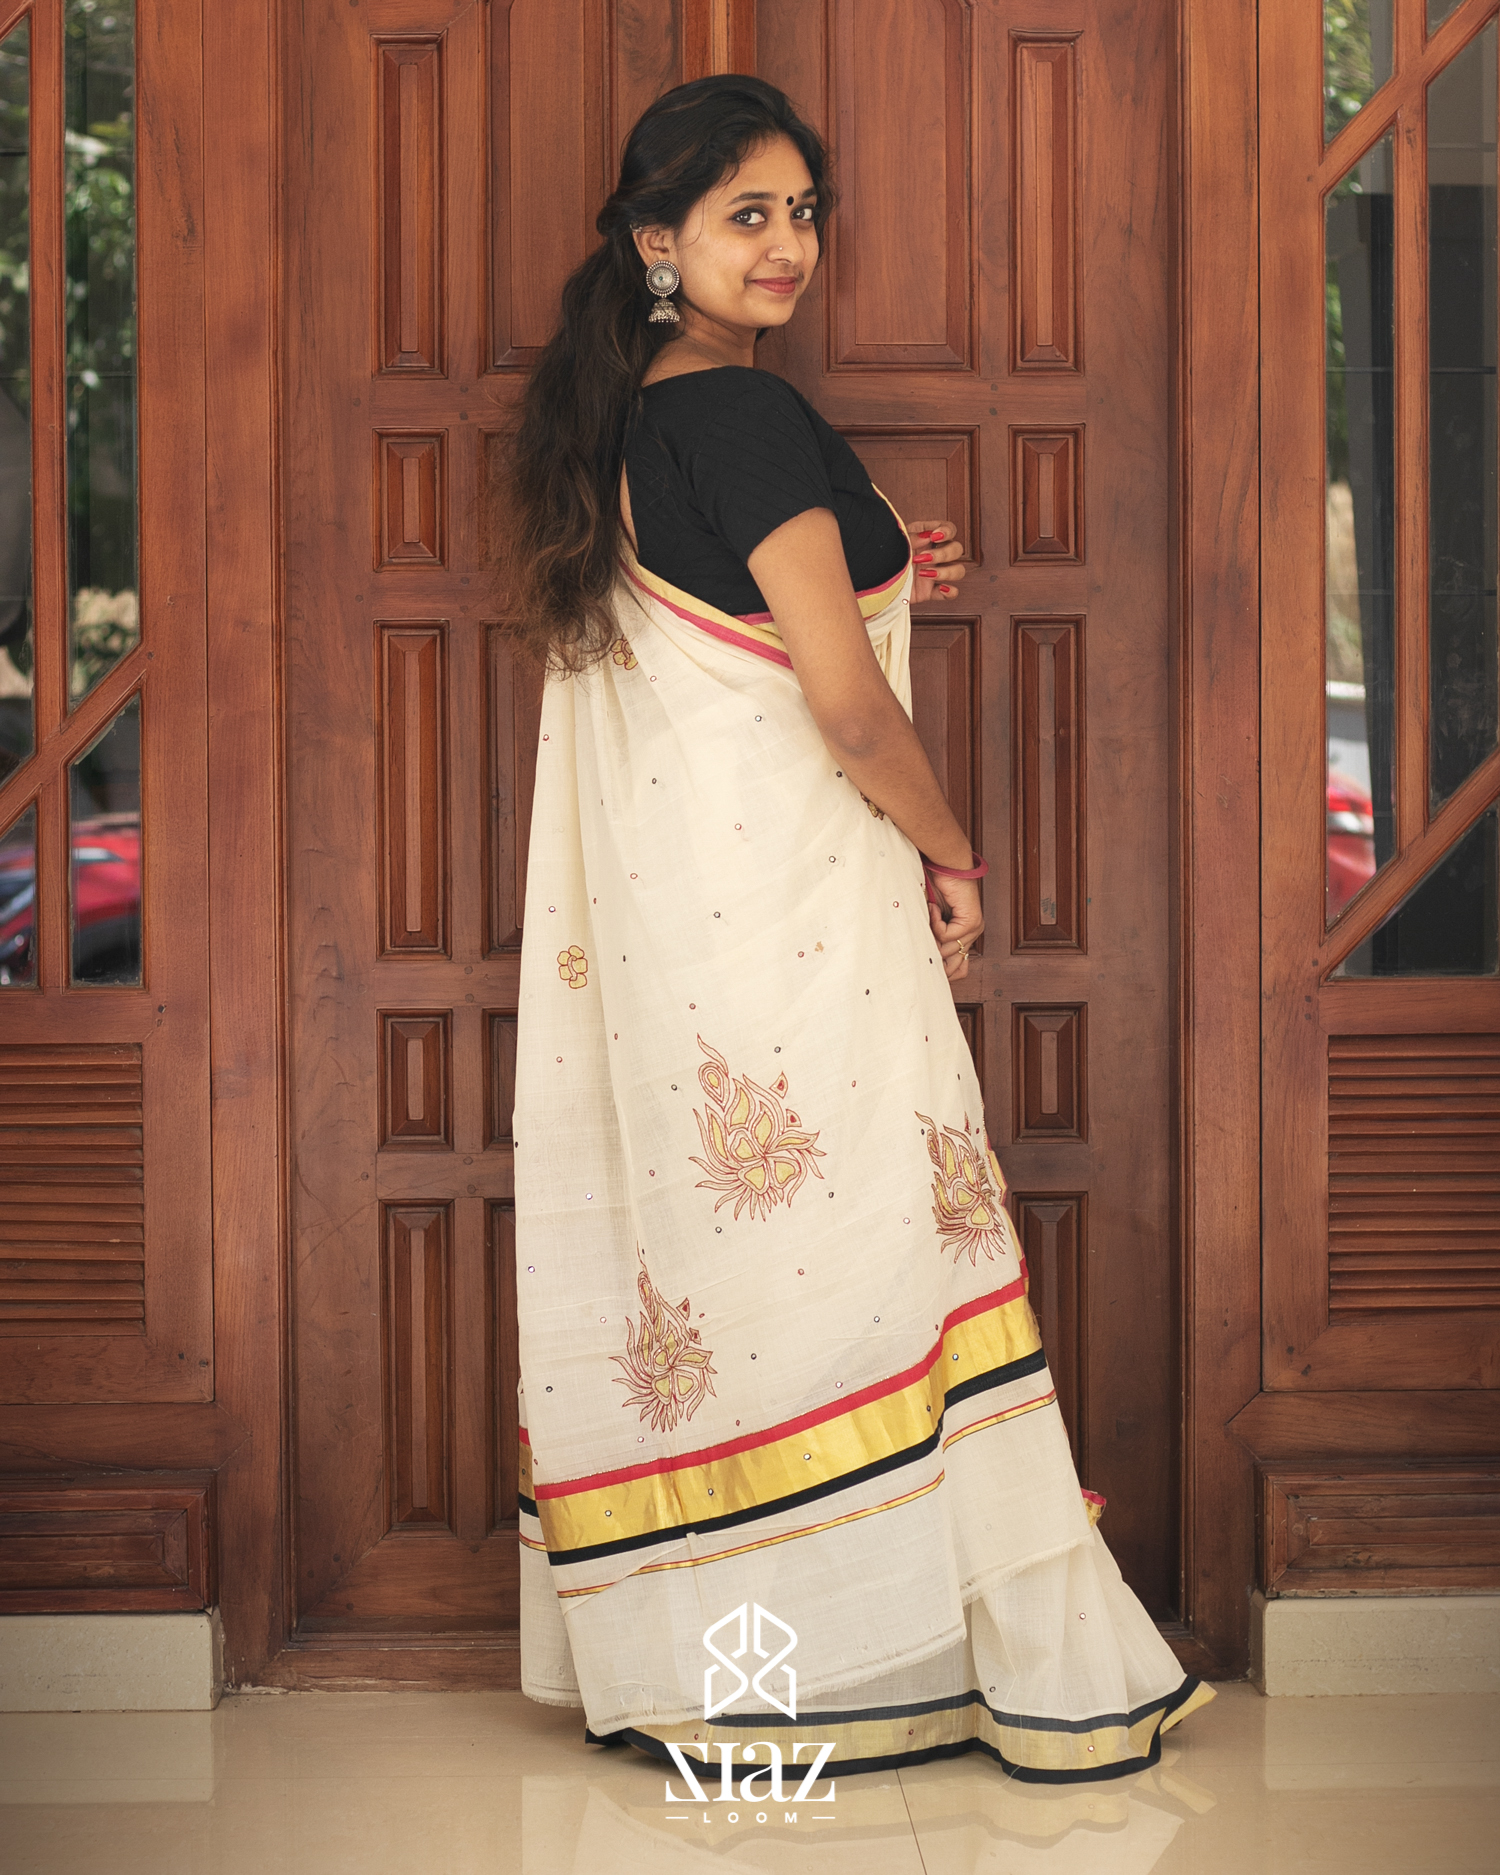 Amrutha redefines elegance in Kerala saree​ | Times of India